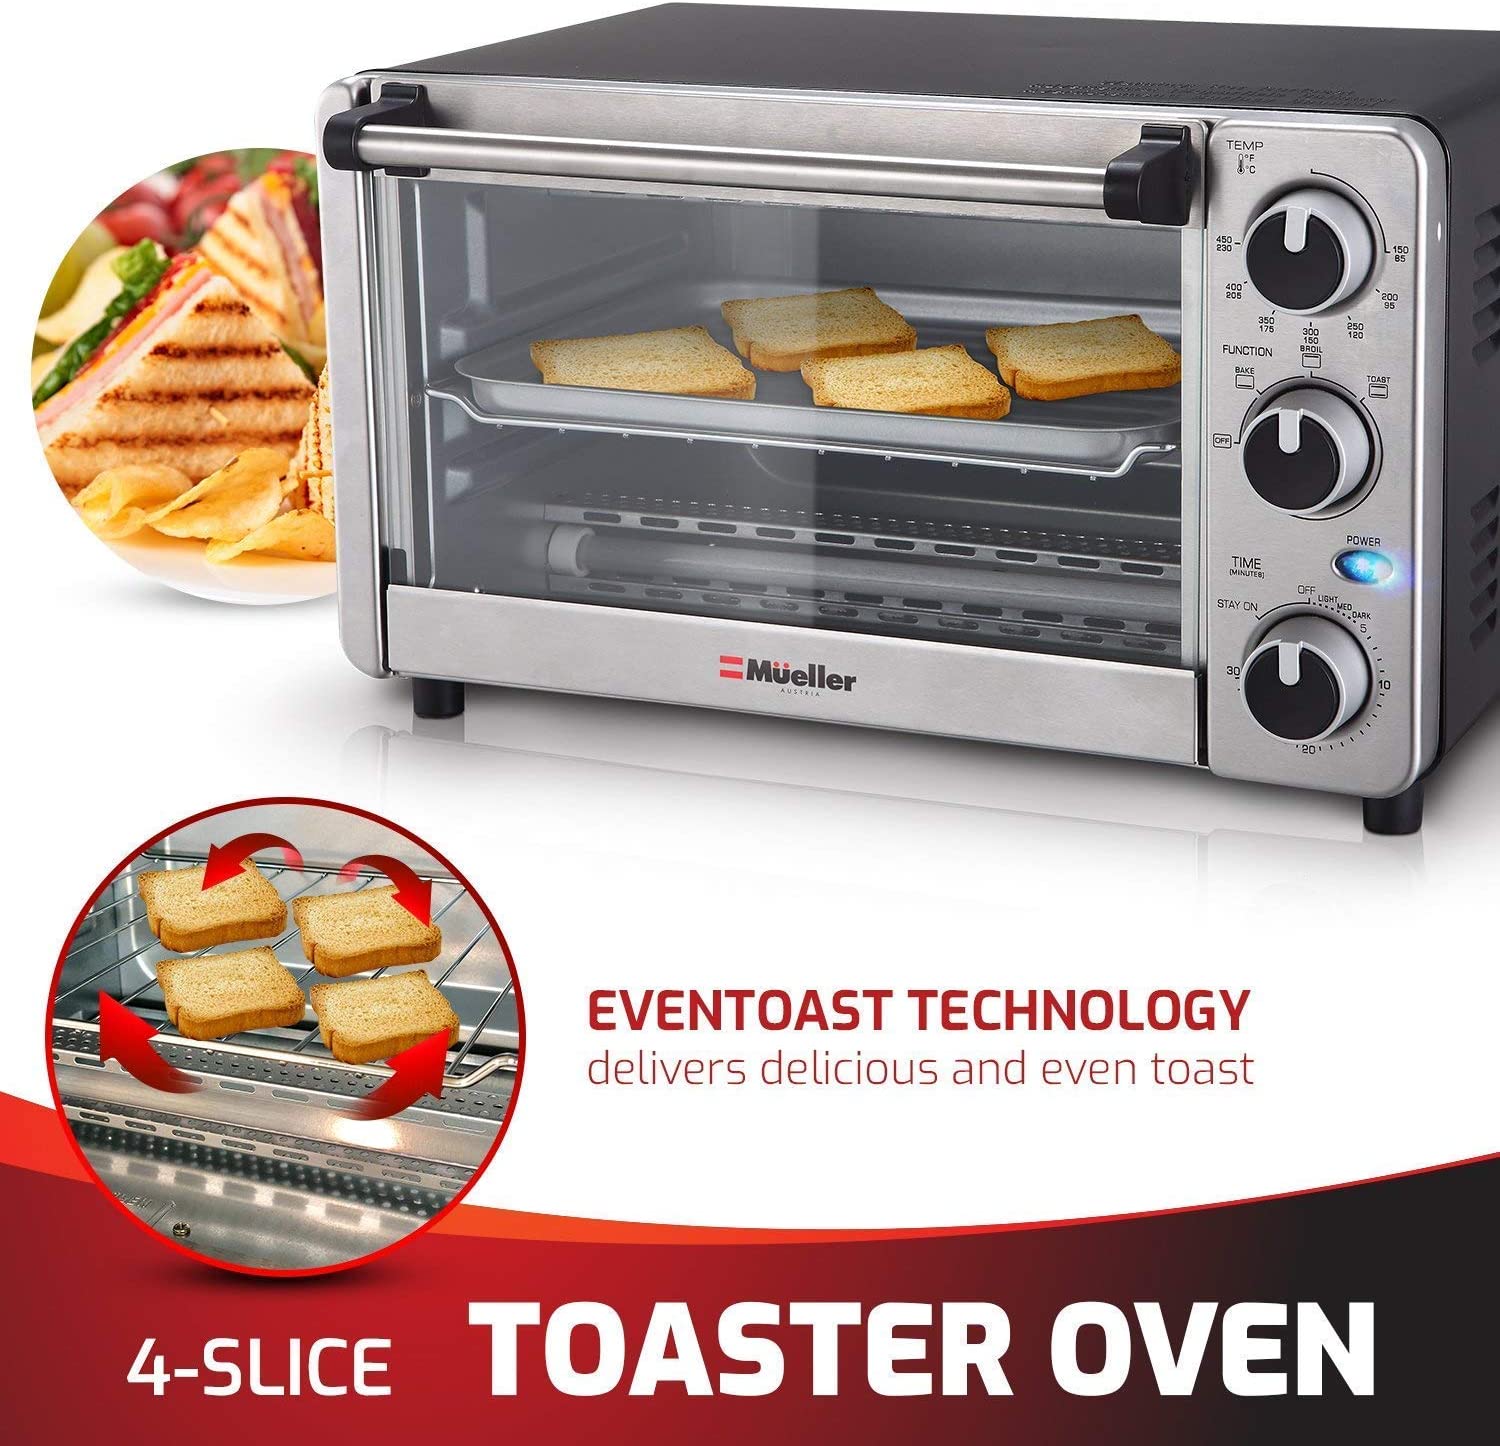 https://bigbigmart.com/wp-content/uploads/2023/06/Mueller-Austria-Toaster-Oven-4-Slice-Multi-function-Stainless-Steel-Finish-with-Timer-Toast-Bake-Broil-Settings-Natural-Convection-1100-Watts-of-Power-Includes-Baking-Pan-and-Rack2.jpg